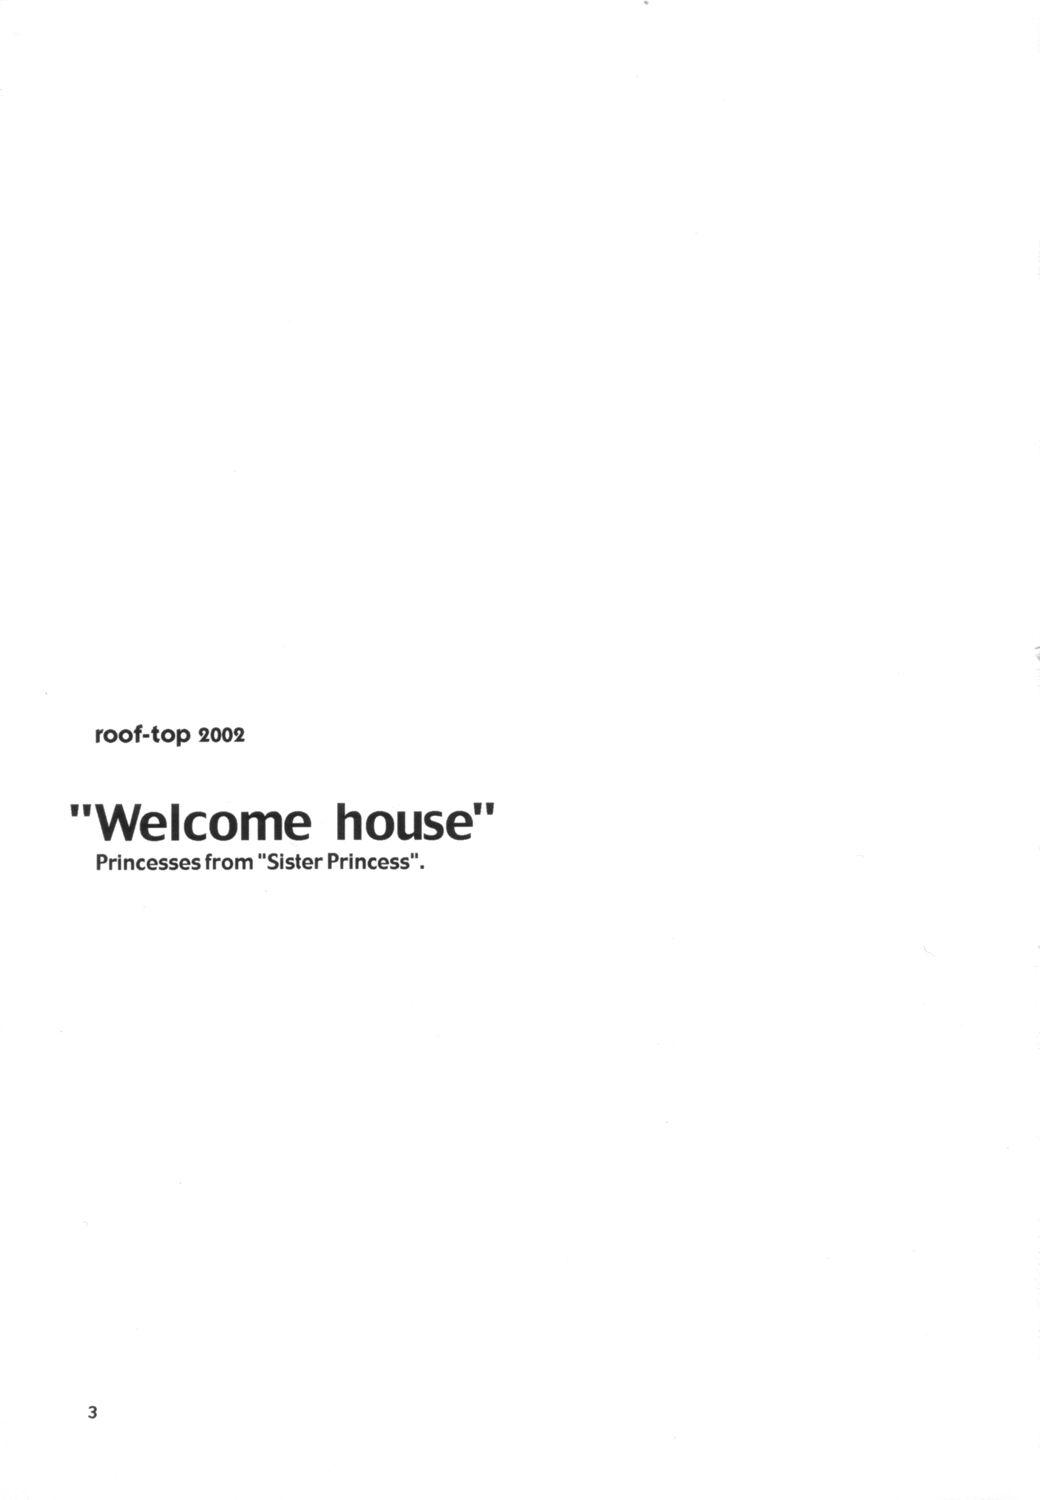 Welcome House 1